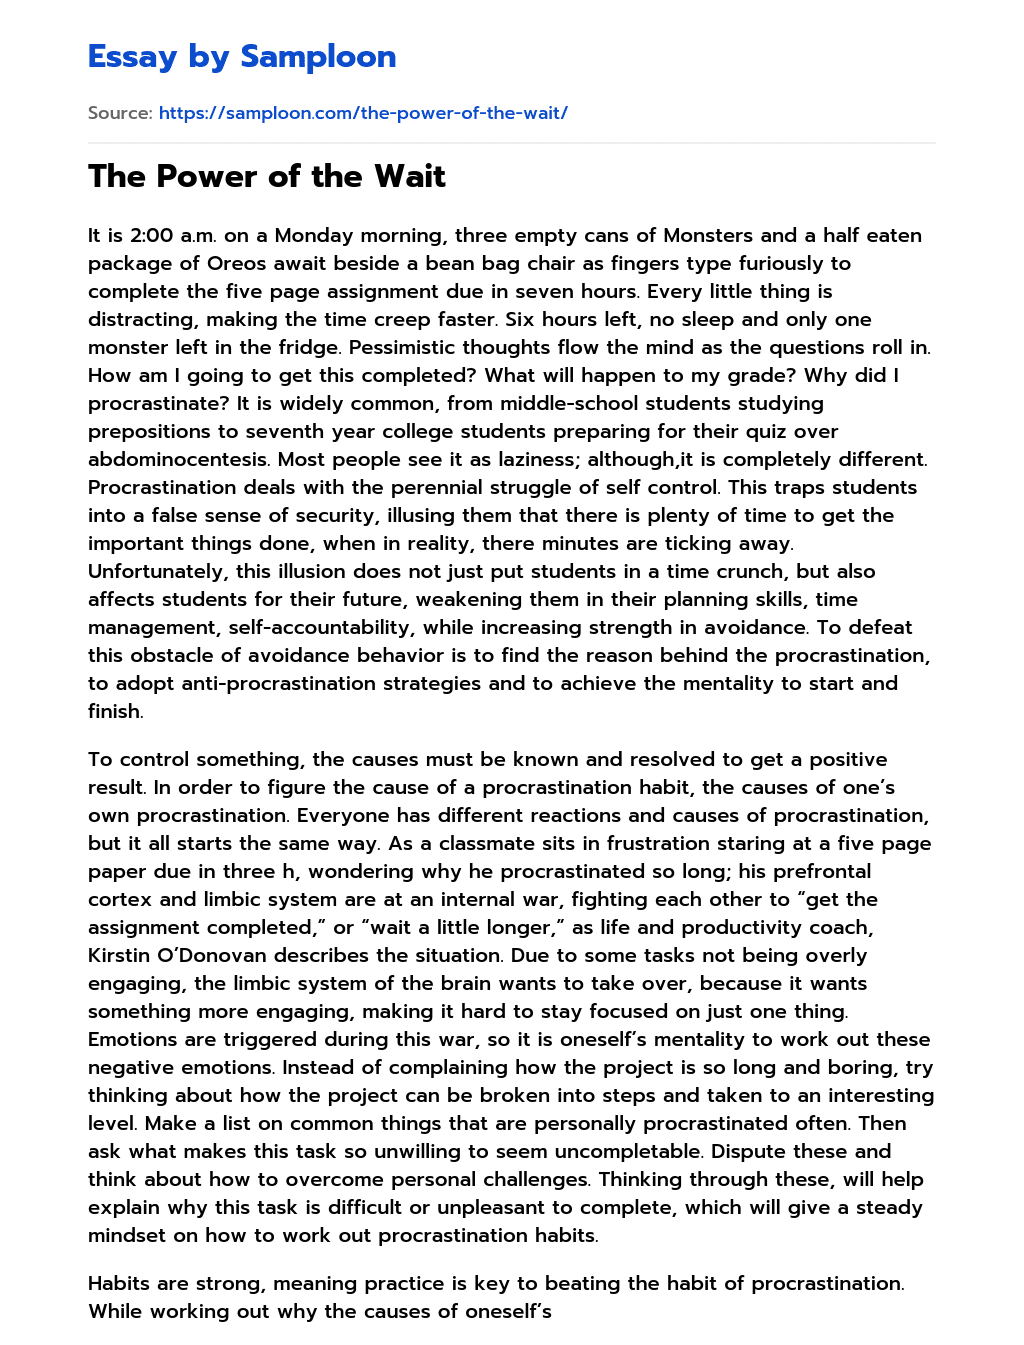 The Power of the Wait essay